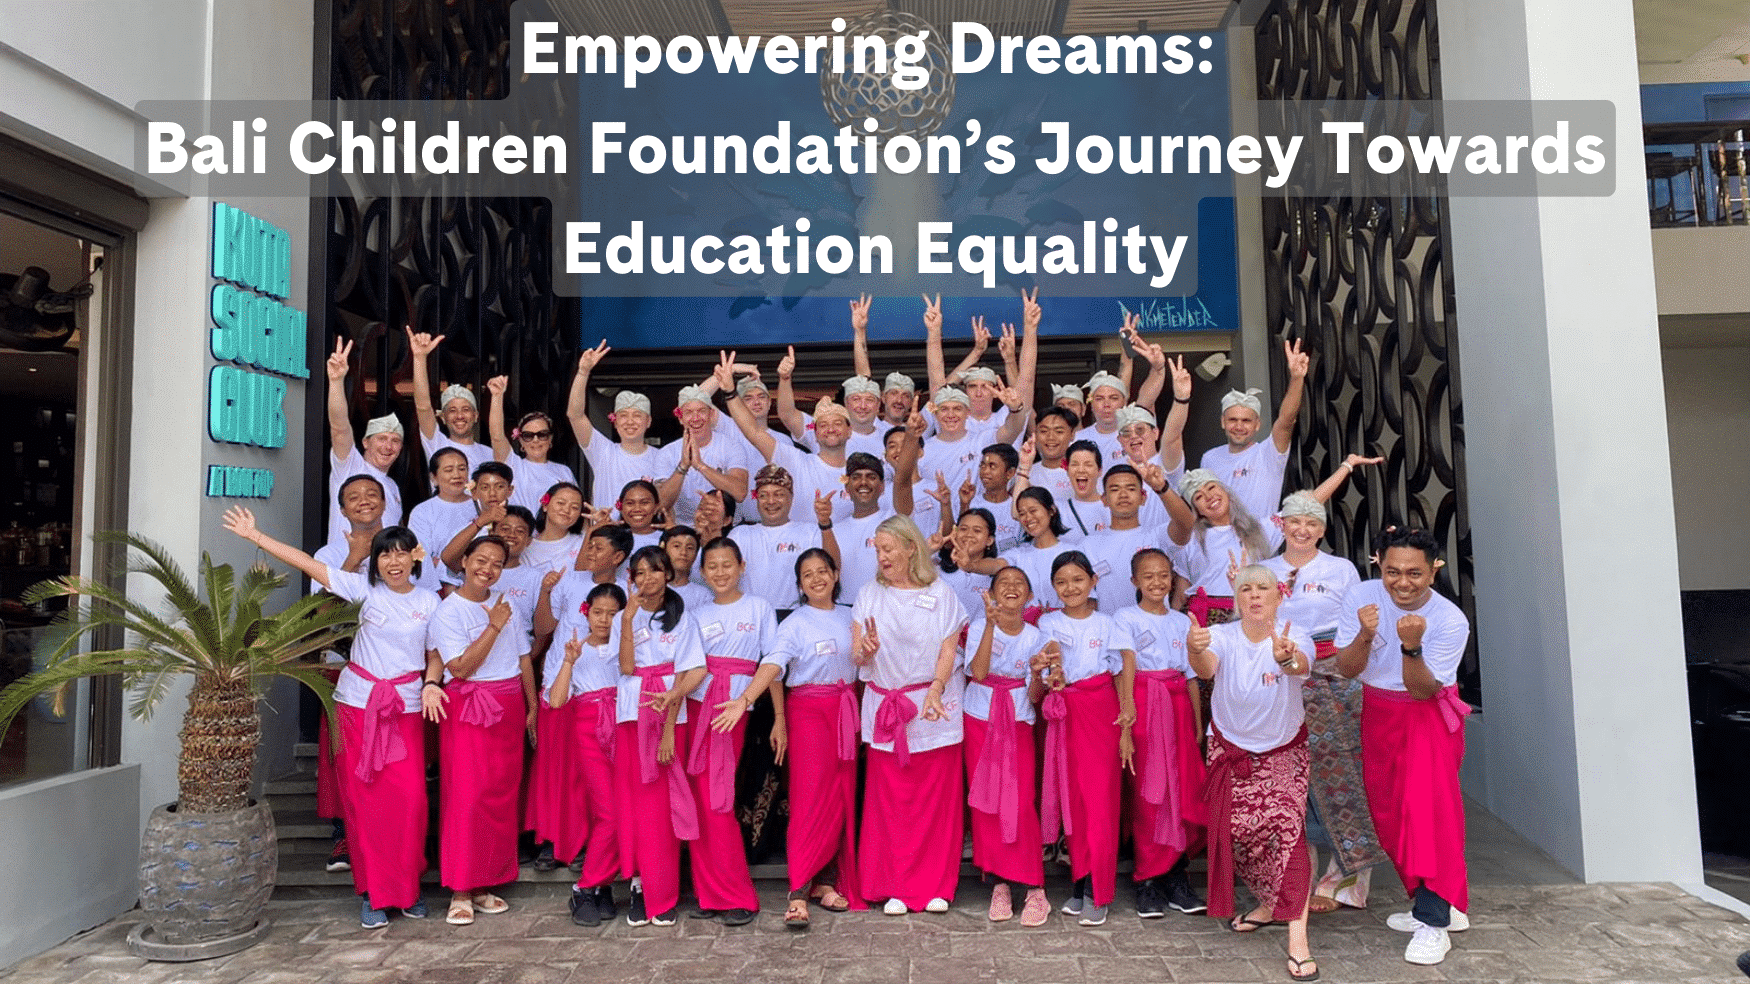 Empowering Dreams: Bali Children Foundation's Journey Towards Education Equality